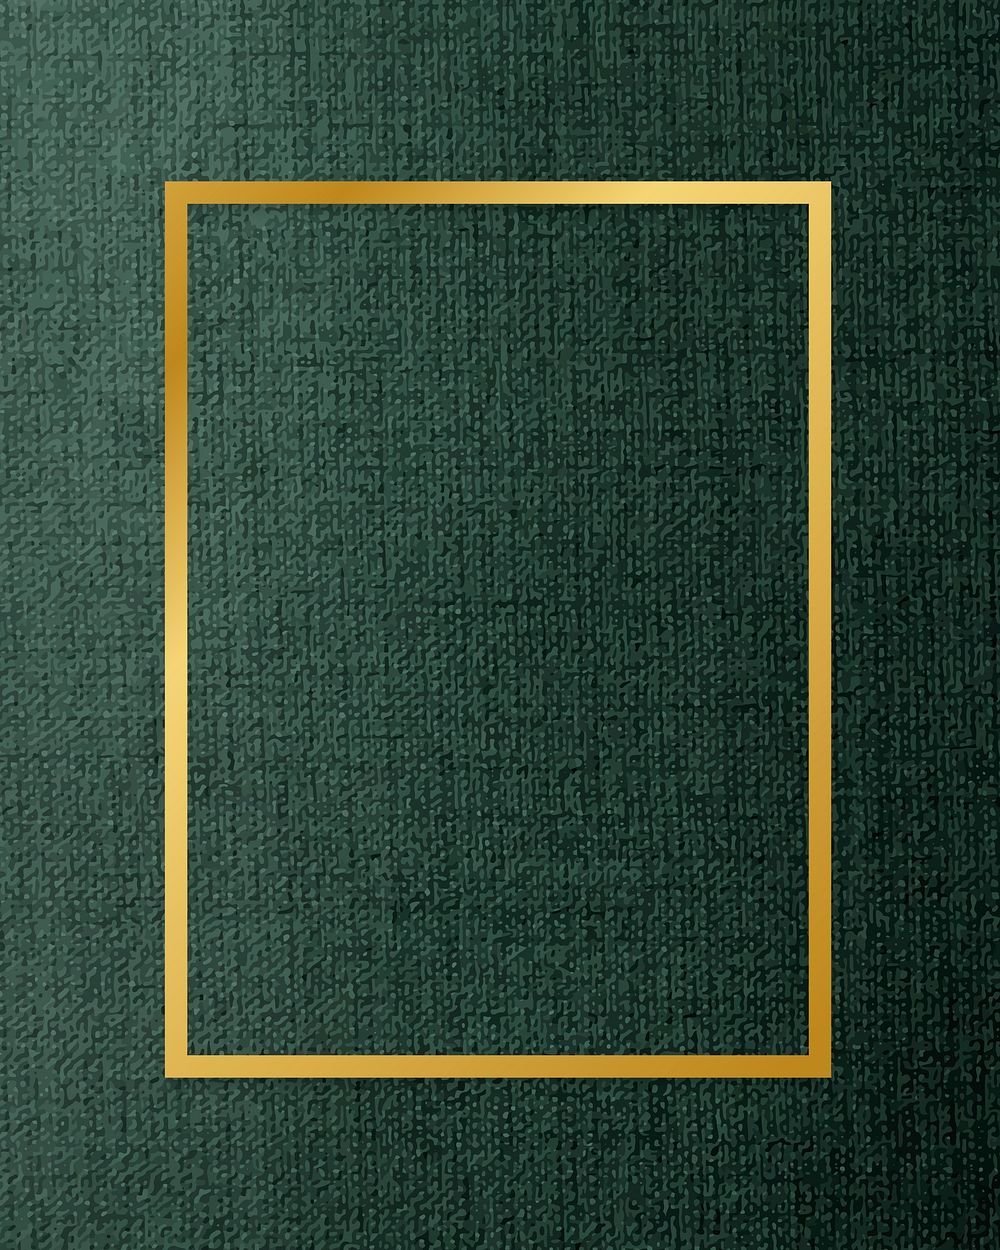 Gold rectangle frame on a green fabric textured background vector